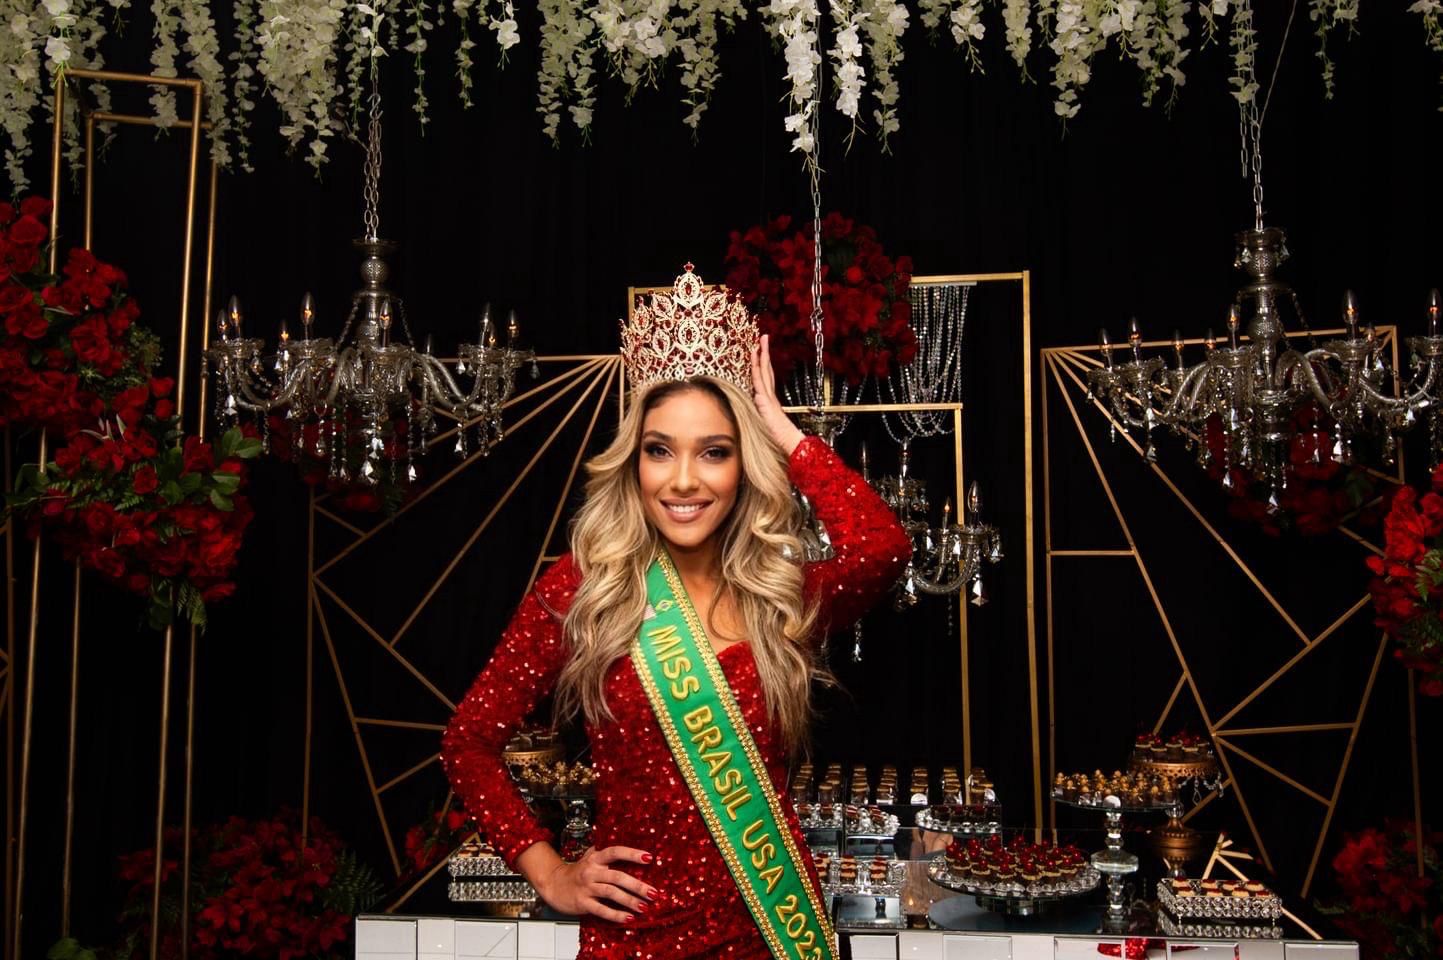 Isadora Antunes crowned as new Miss Brazil USA 2023